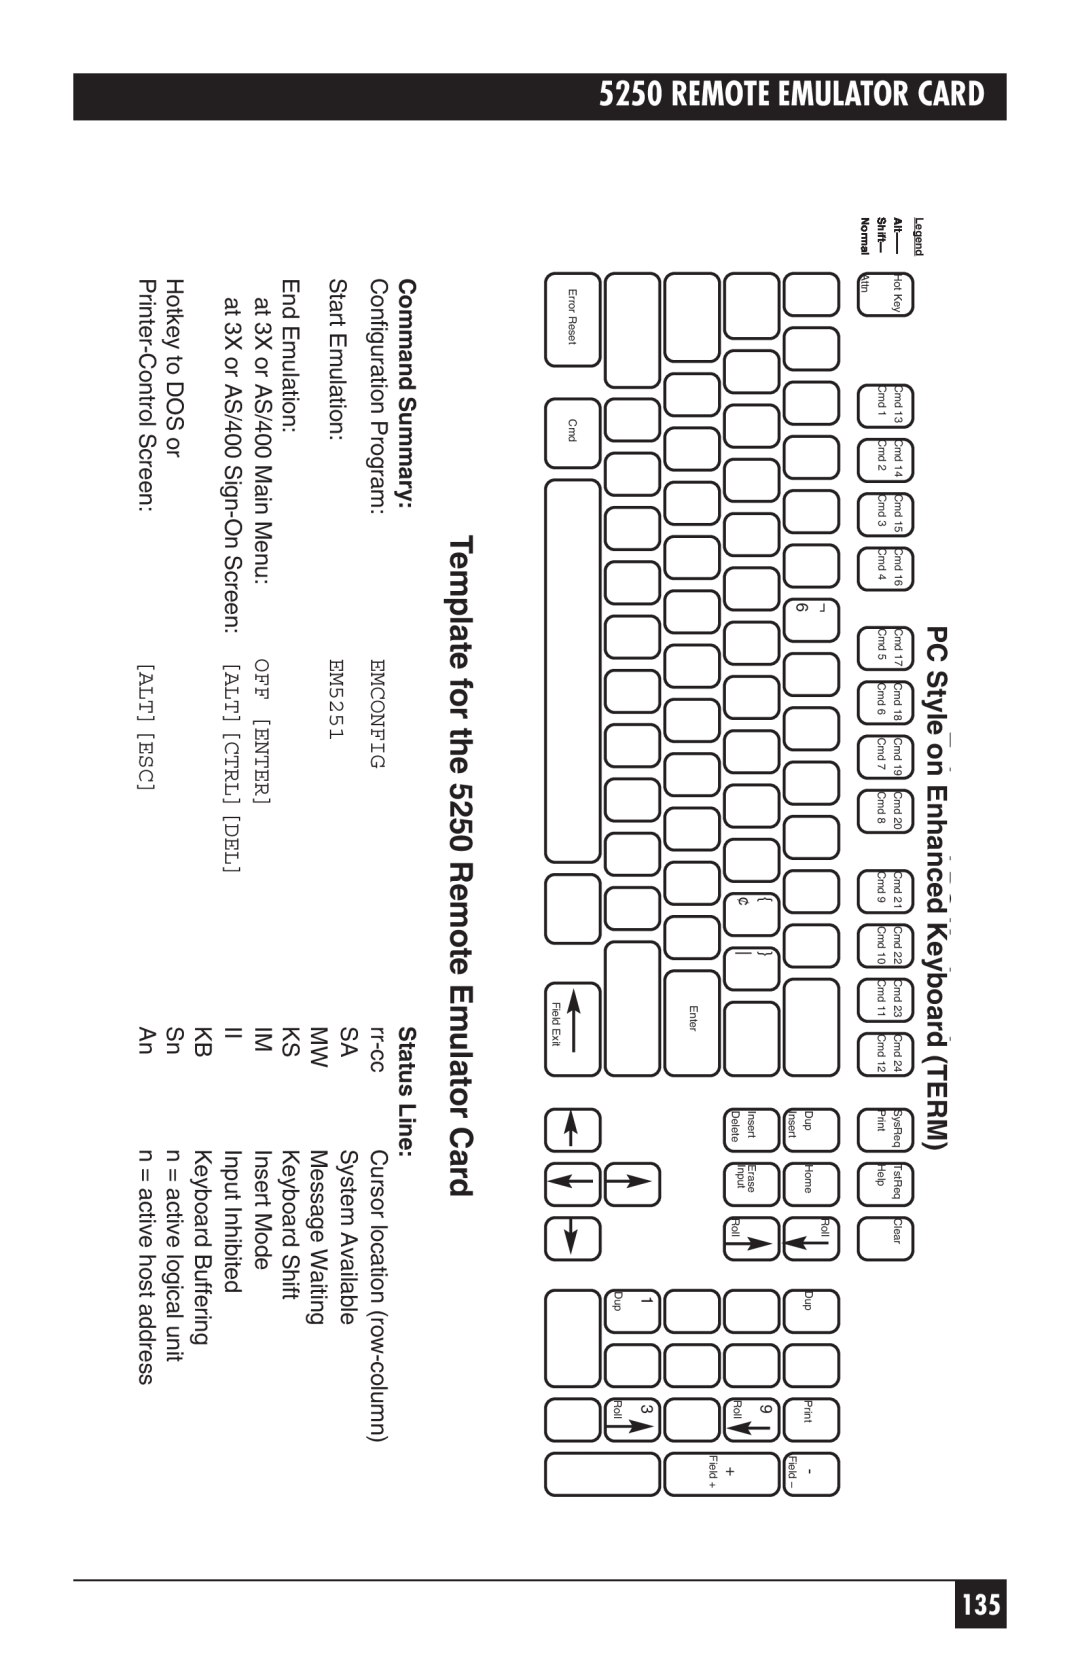 Black Box Template for the 5250 Remote Emulator Card, Enhanced PC, PC Style on EnhancedKeyboard TERM, Command Summary 